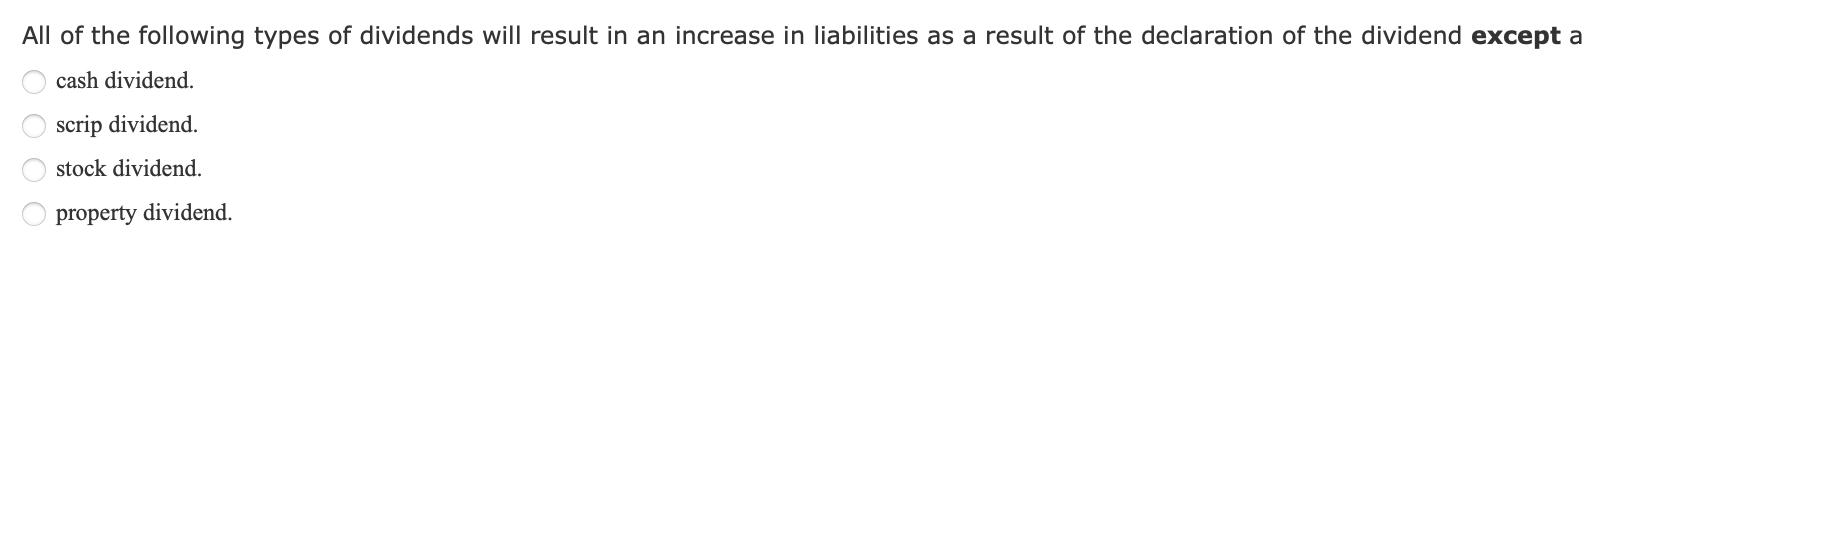 All of the following types of dividends will result in an increase in liabilities as a result of the declaration of the divid